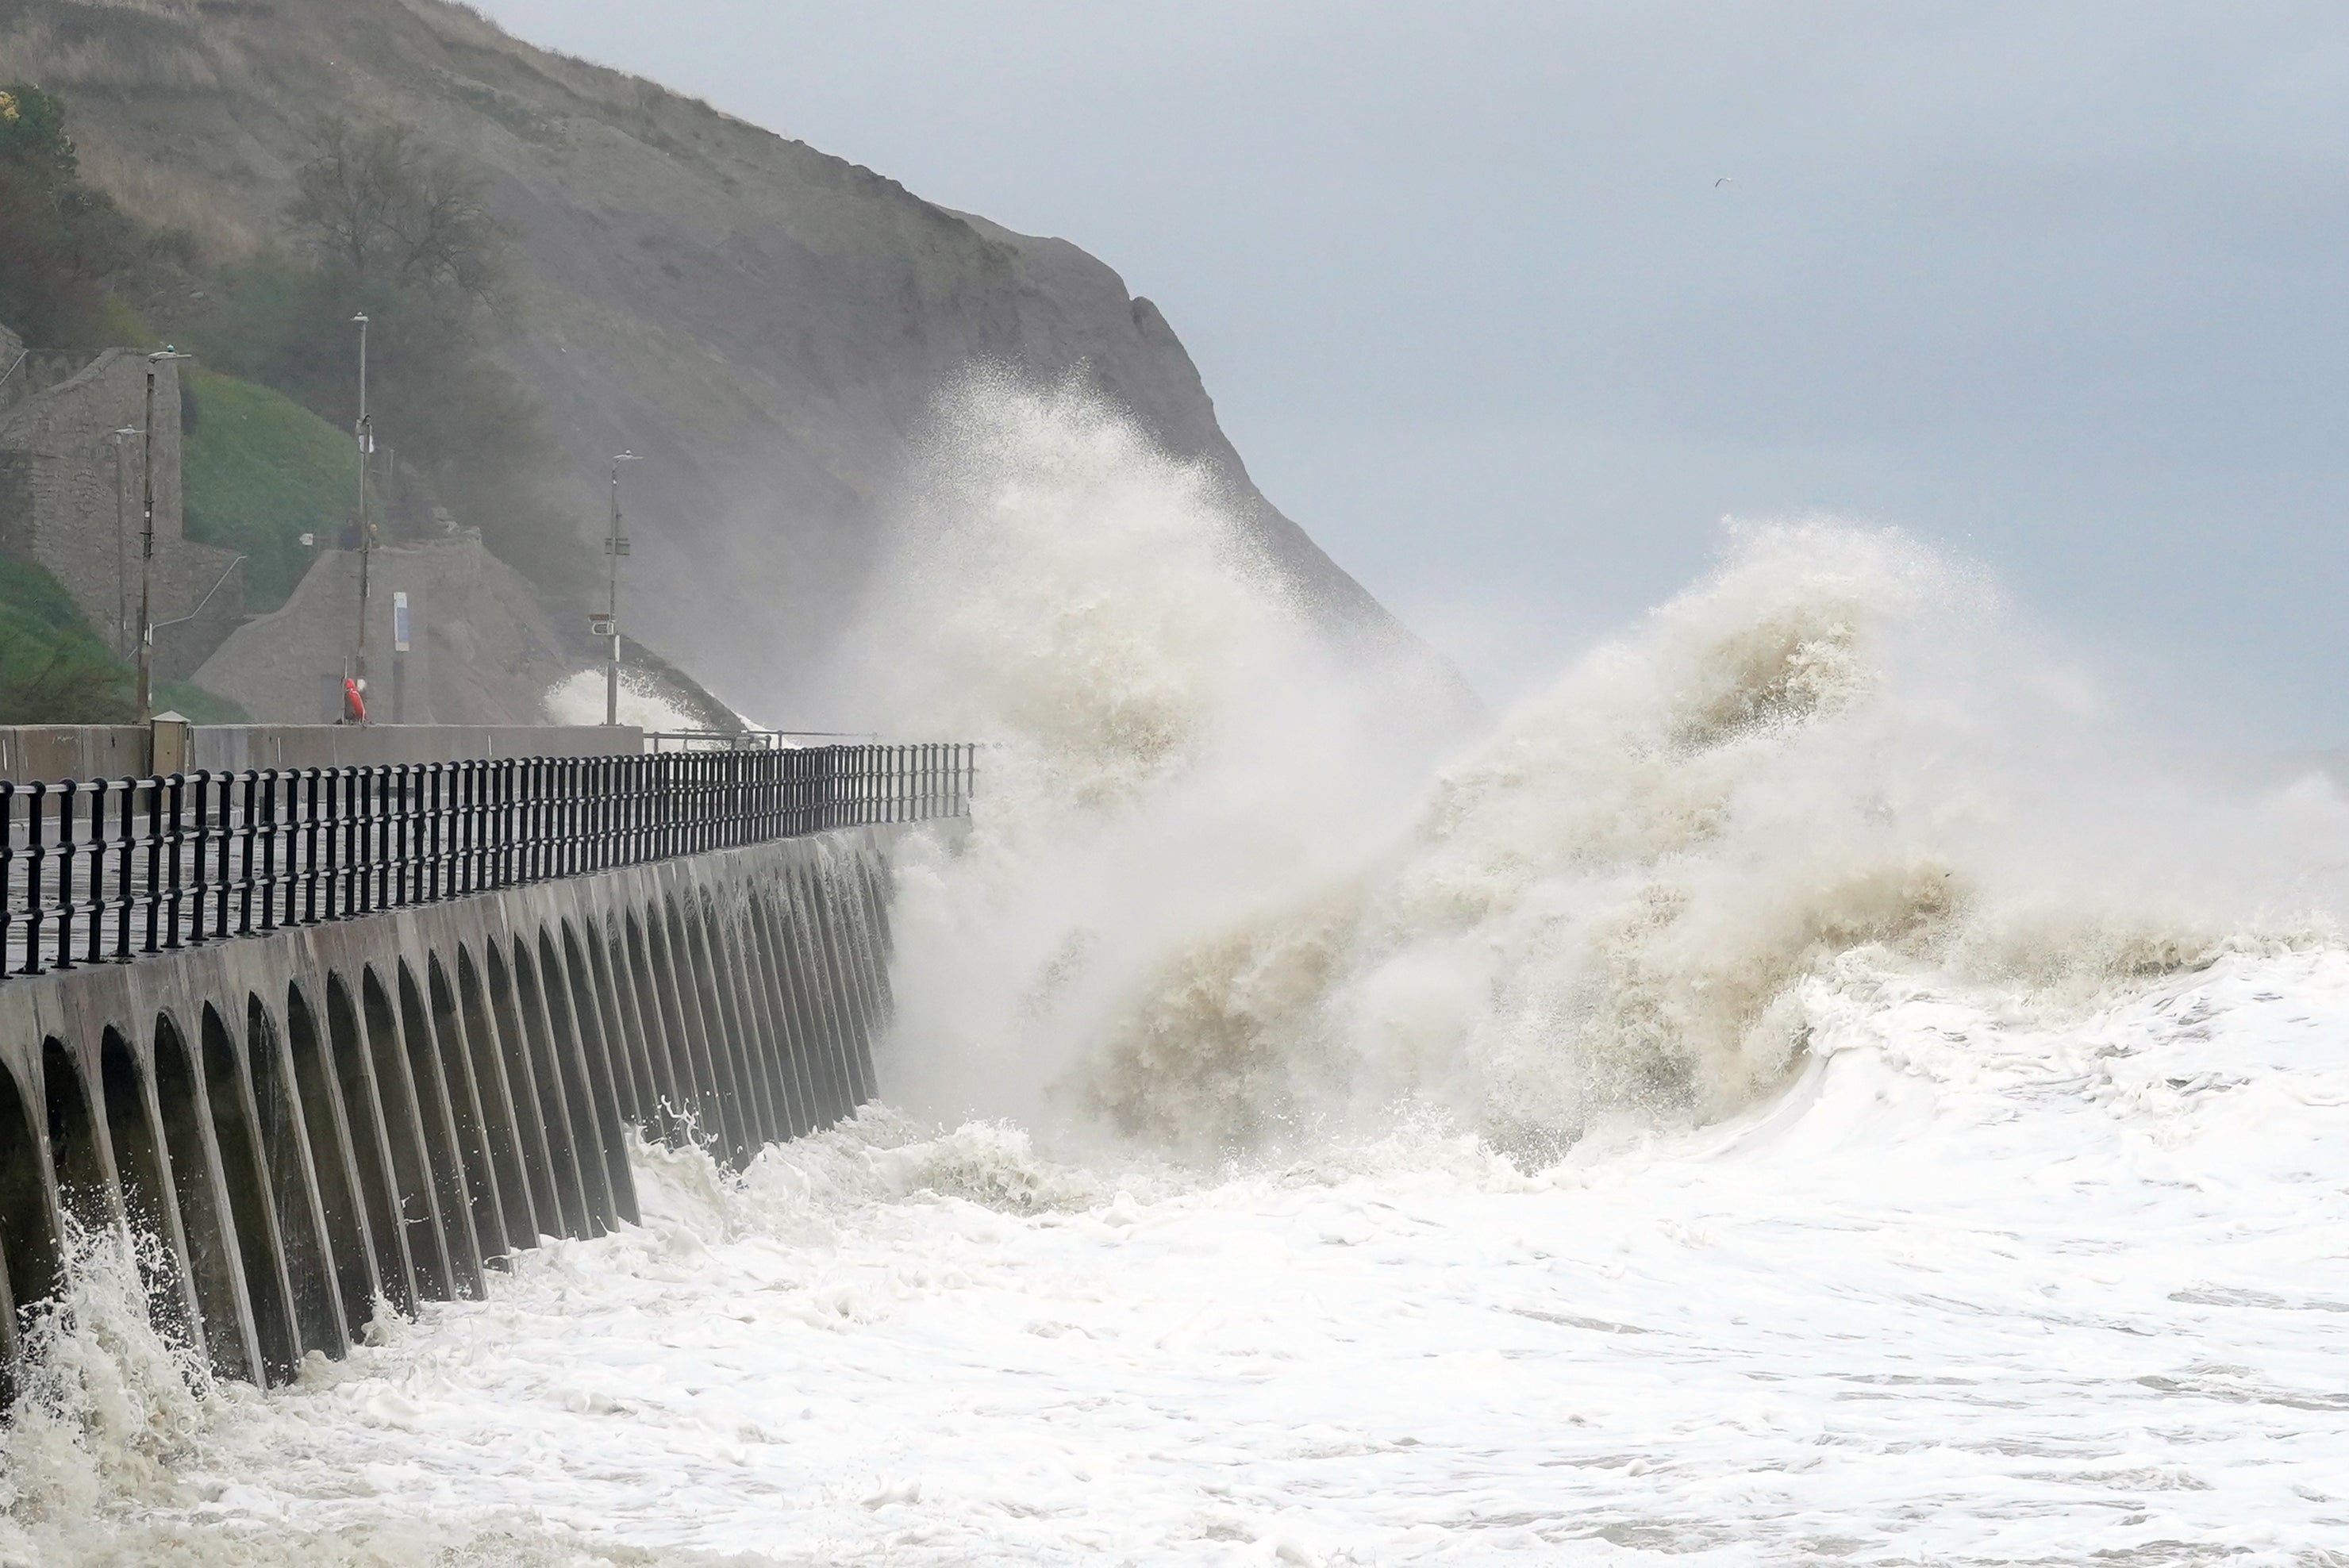 Waves crash over the promenade in Folkestone, Kent, as Storm Ciaran brings high winds and heavy rain along the south coast of Englan